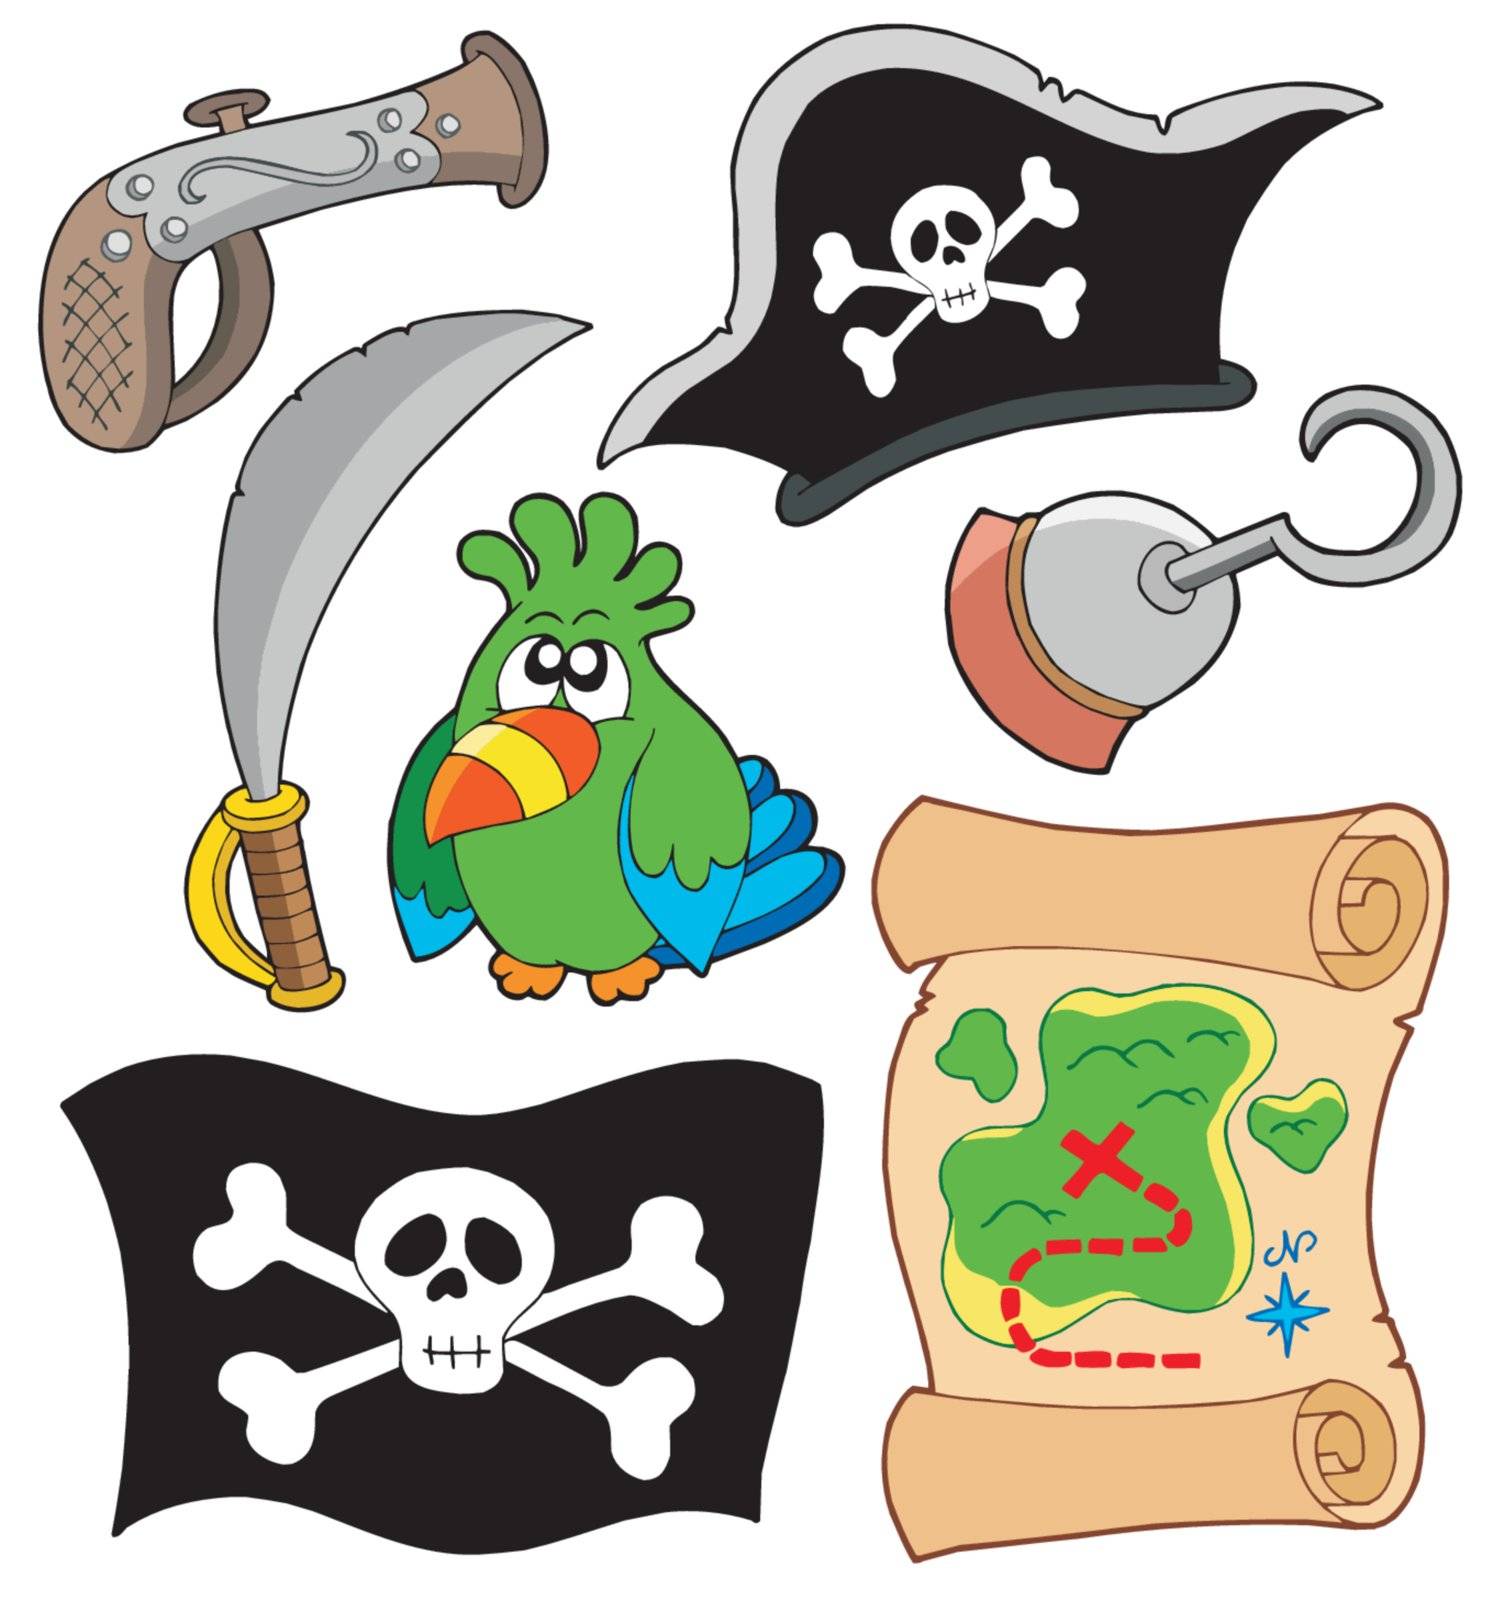 Pirate equipment collection by clairev